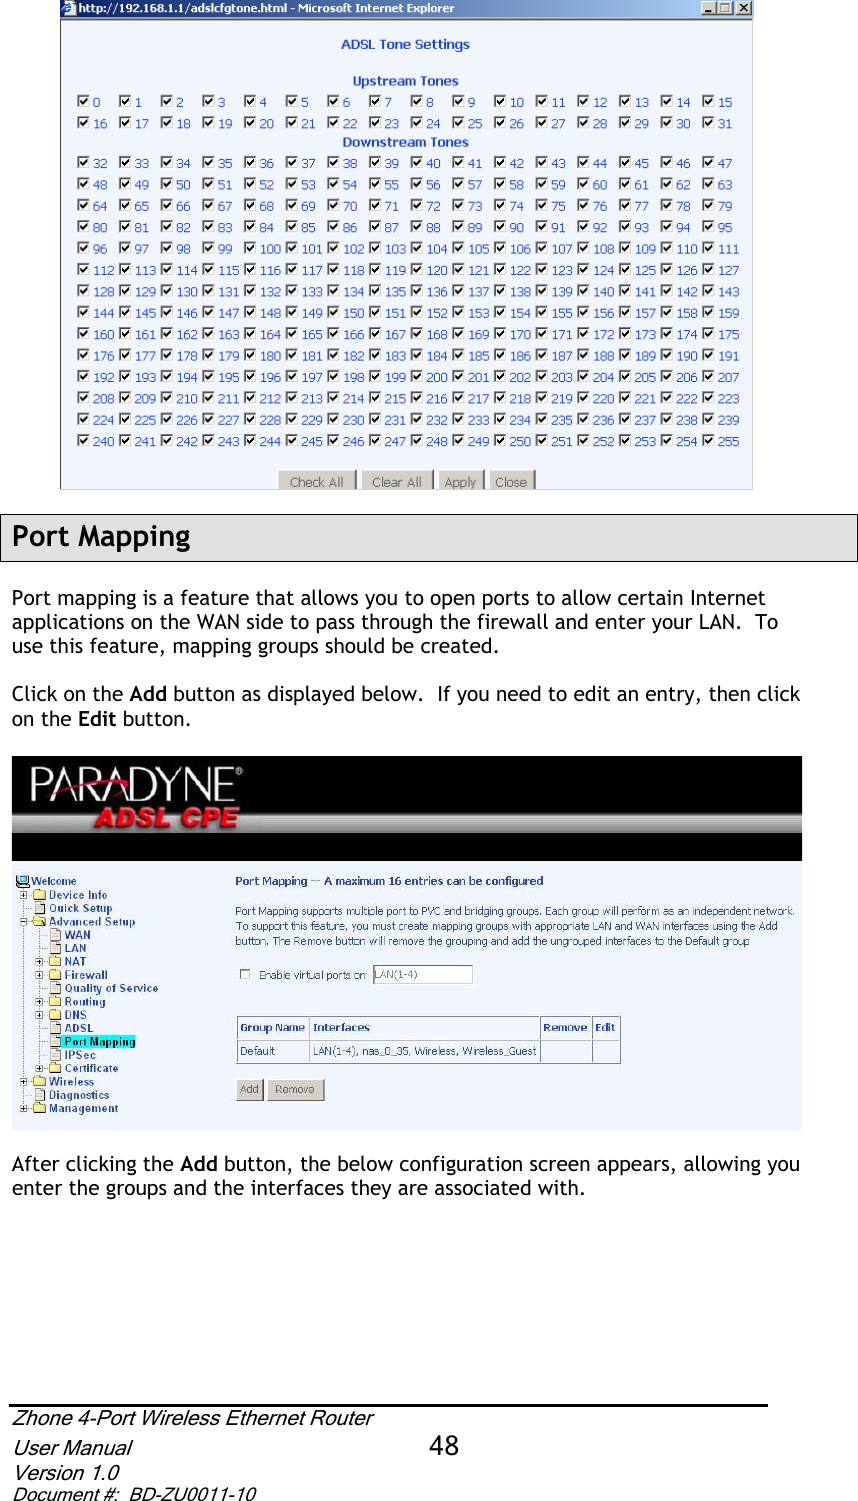 Port Mapping Port mapping is a feature that allows you to open ports to allow certain Internet applications on the WAN side to pass through the firewall and enter your LAN.  To use this feature, mapping groups should be created.  Click on the Add button as displayed below.  If you need to edit an entry, then click on the Edit button.After clicking the Add button, the below configuration screen appears, allowing you enter the groups and the interfaces they are associated with.   Zhone 4-Port Wireless Ethernet Router User Manual 48Version 1.0 Document #:  BD-ZU0011-10